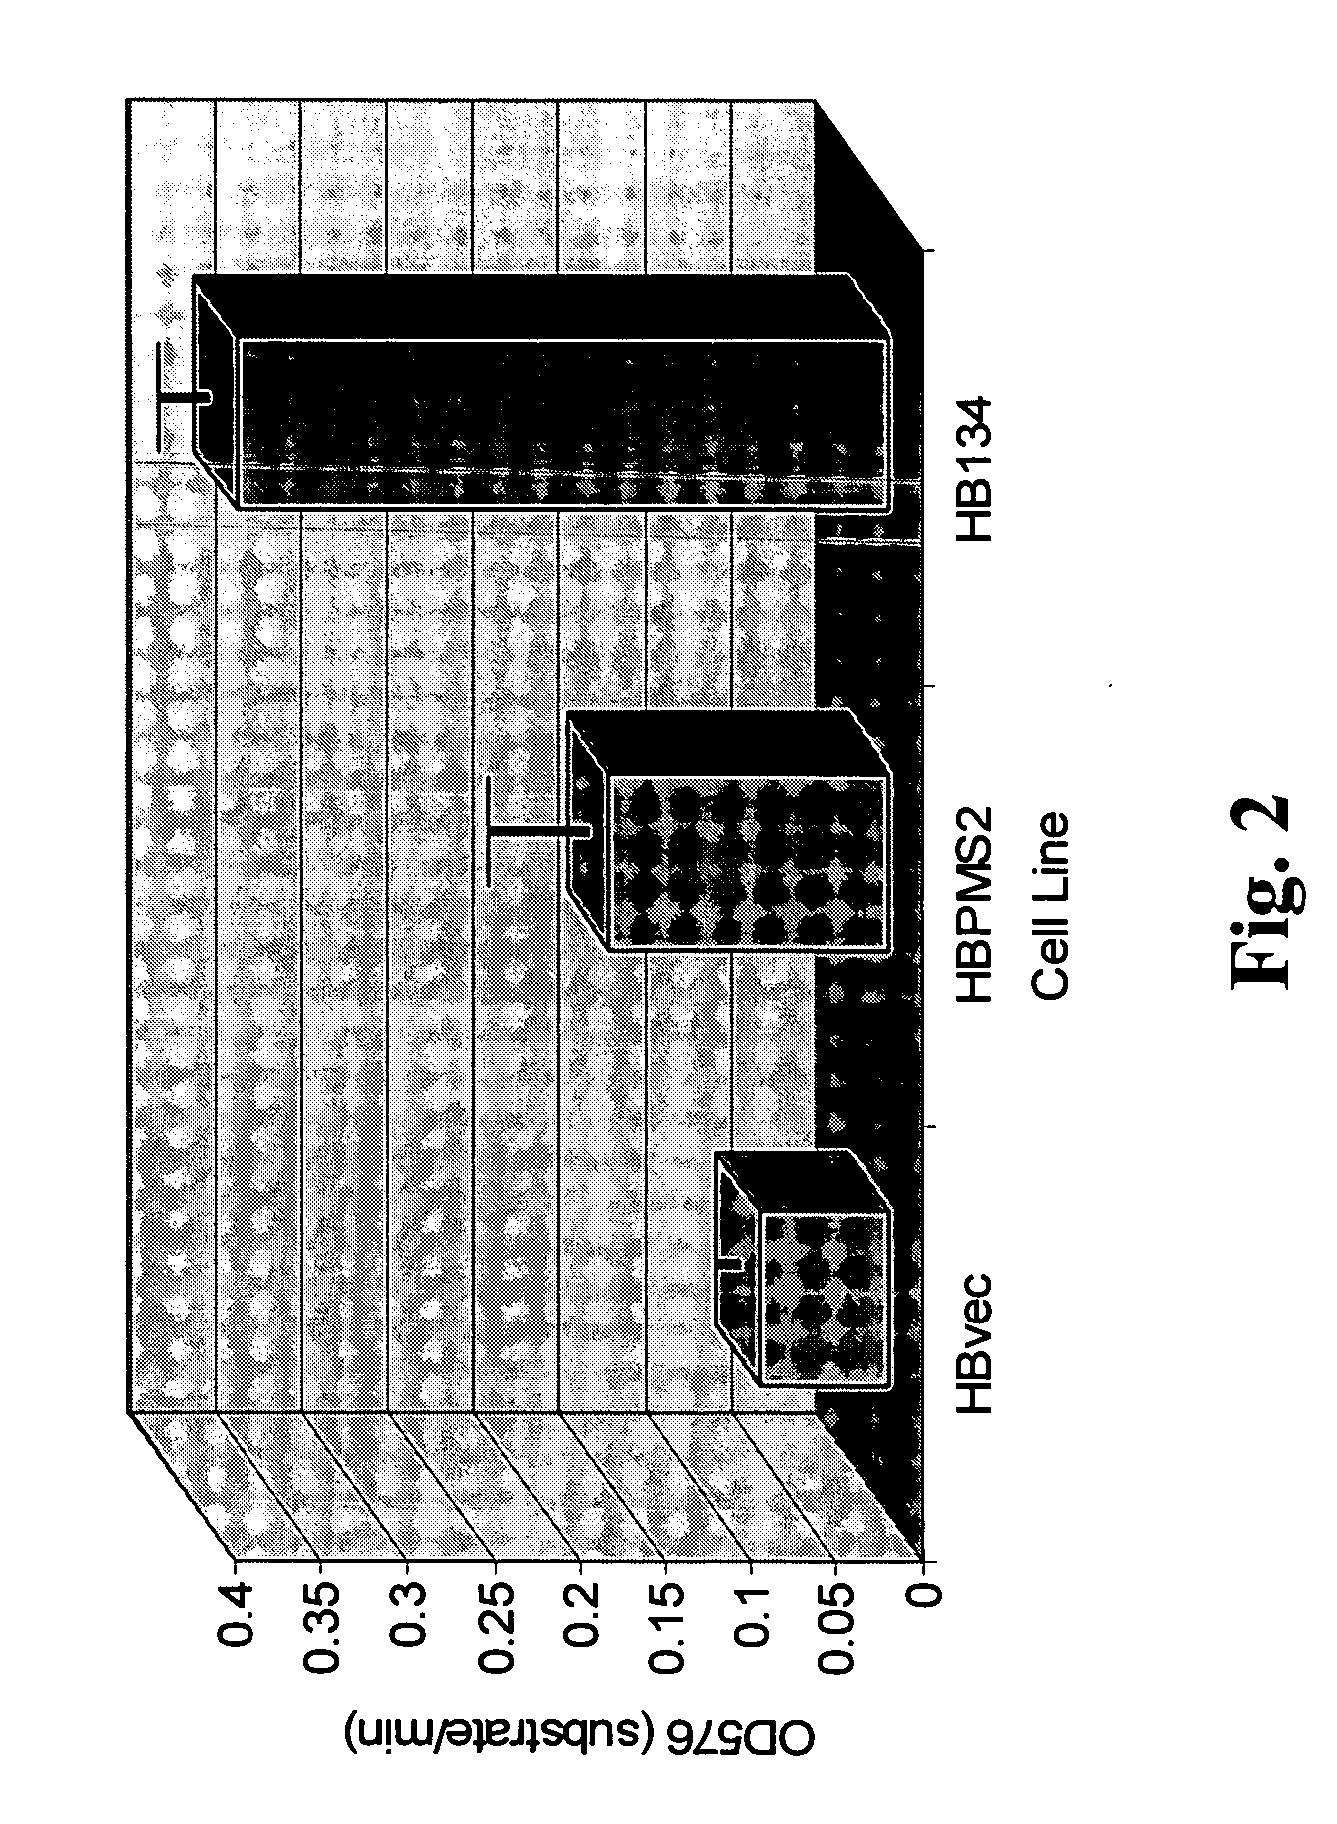 Antibodies and methods for generating genetically altered antibodies with enhanced effector function